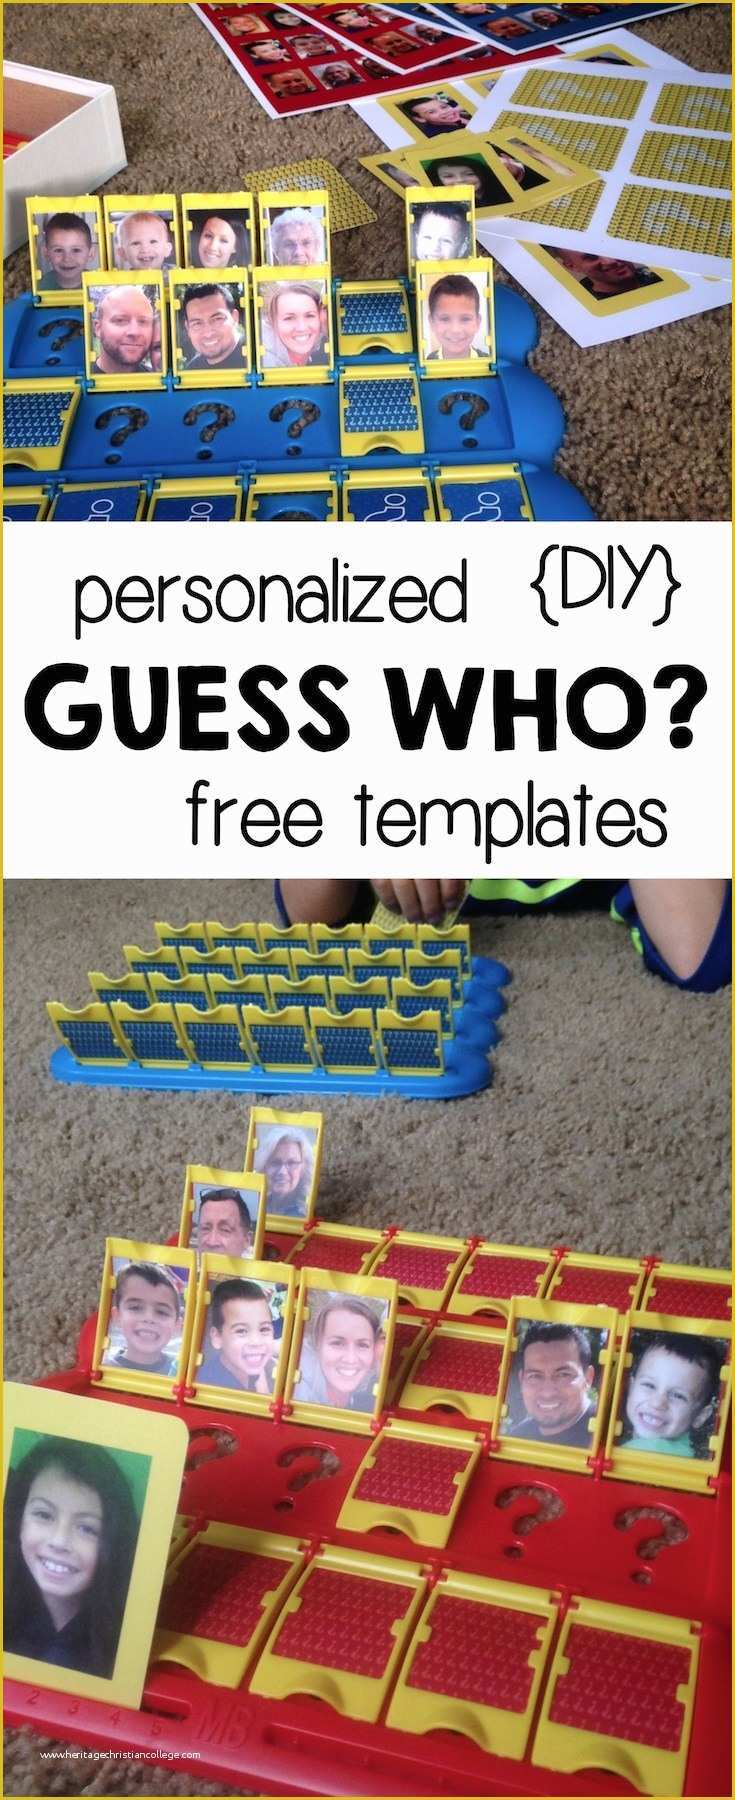 Free Game Templates Of Diy Guess who Template Free Printables Paper Trail Design